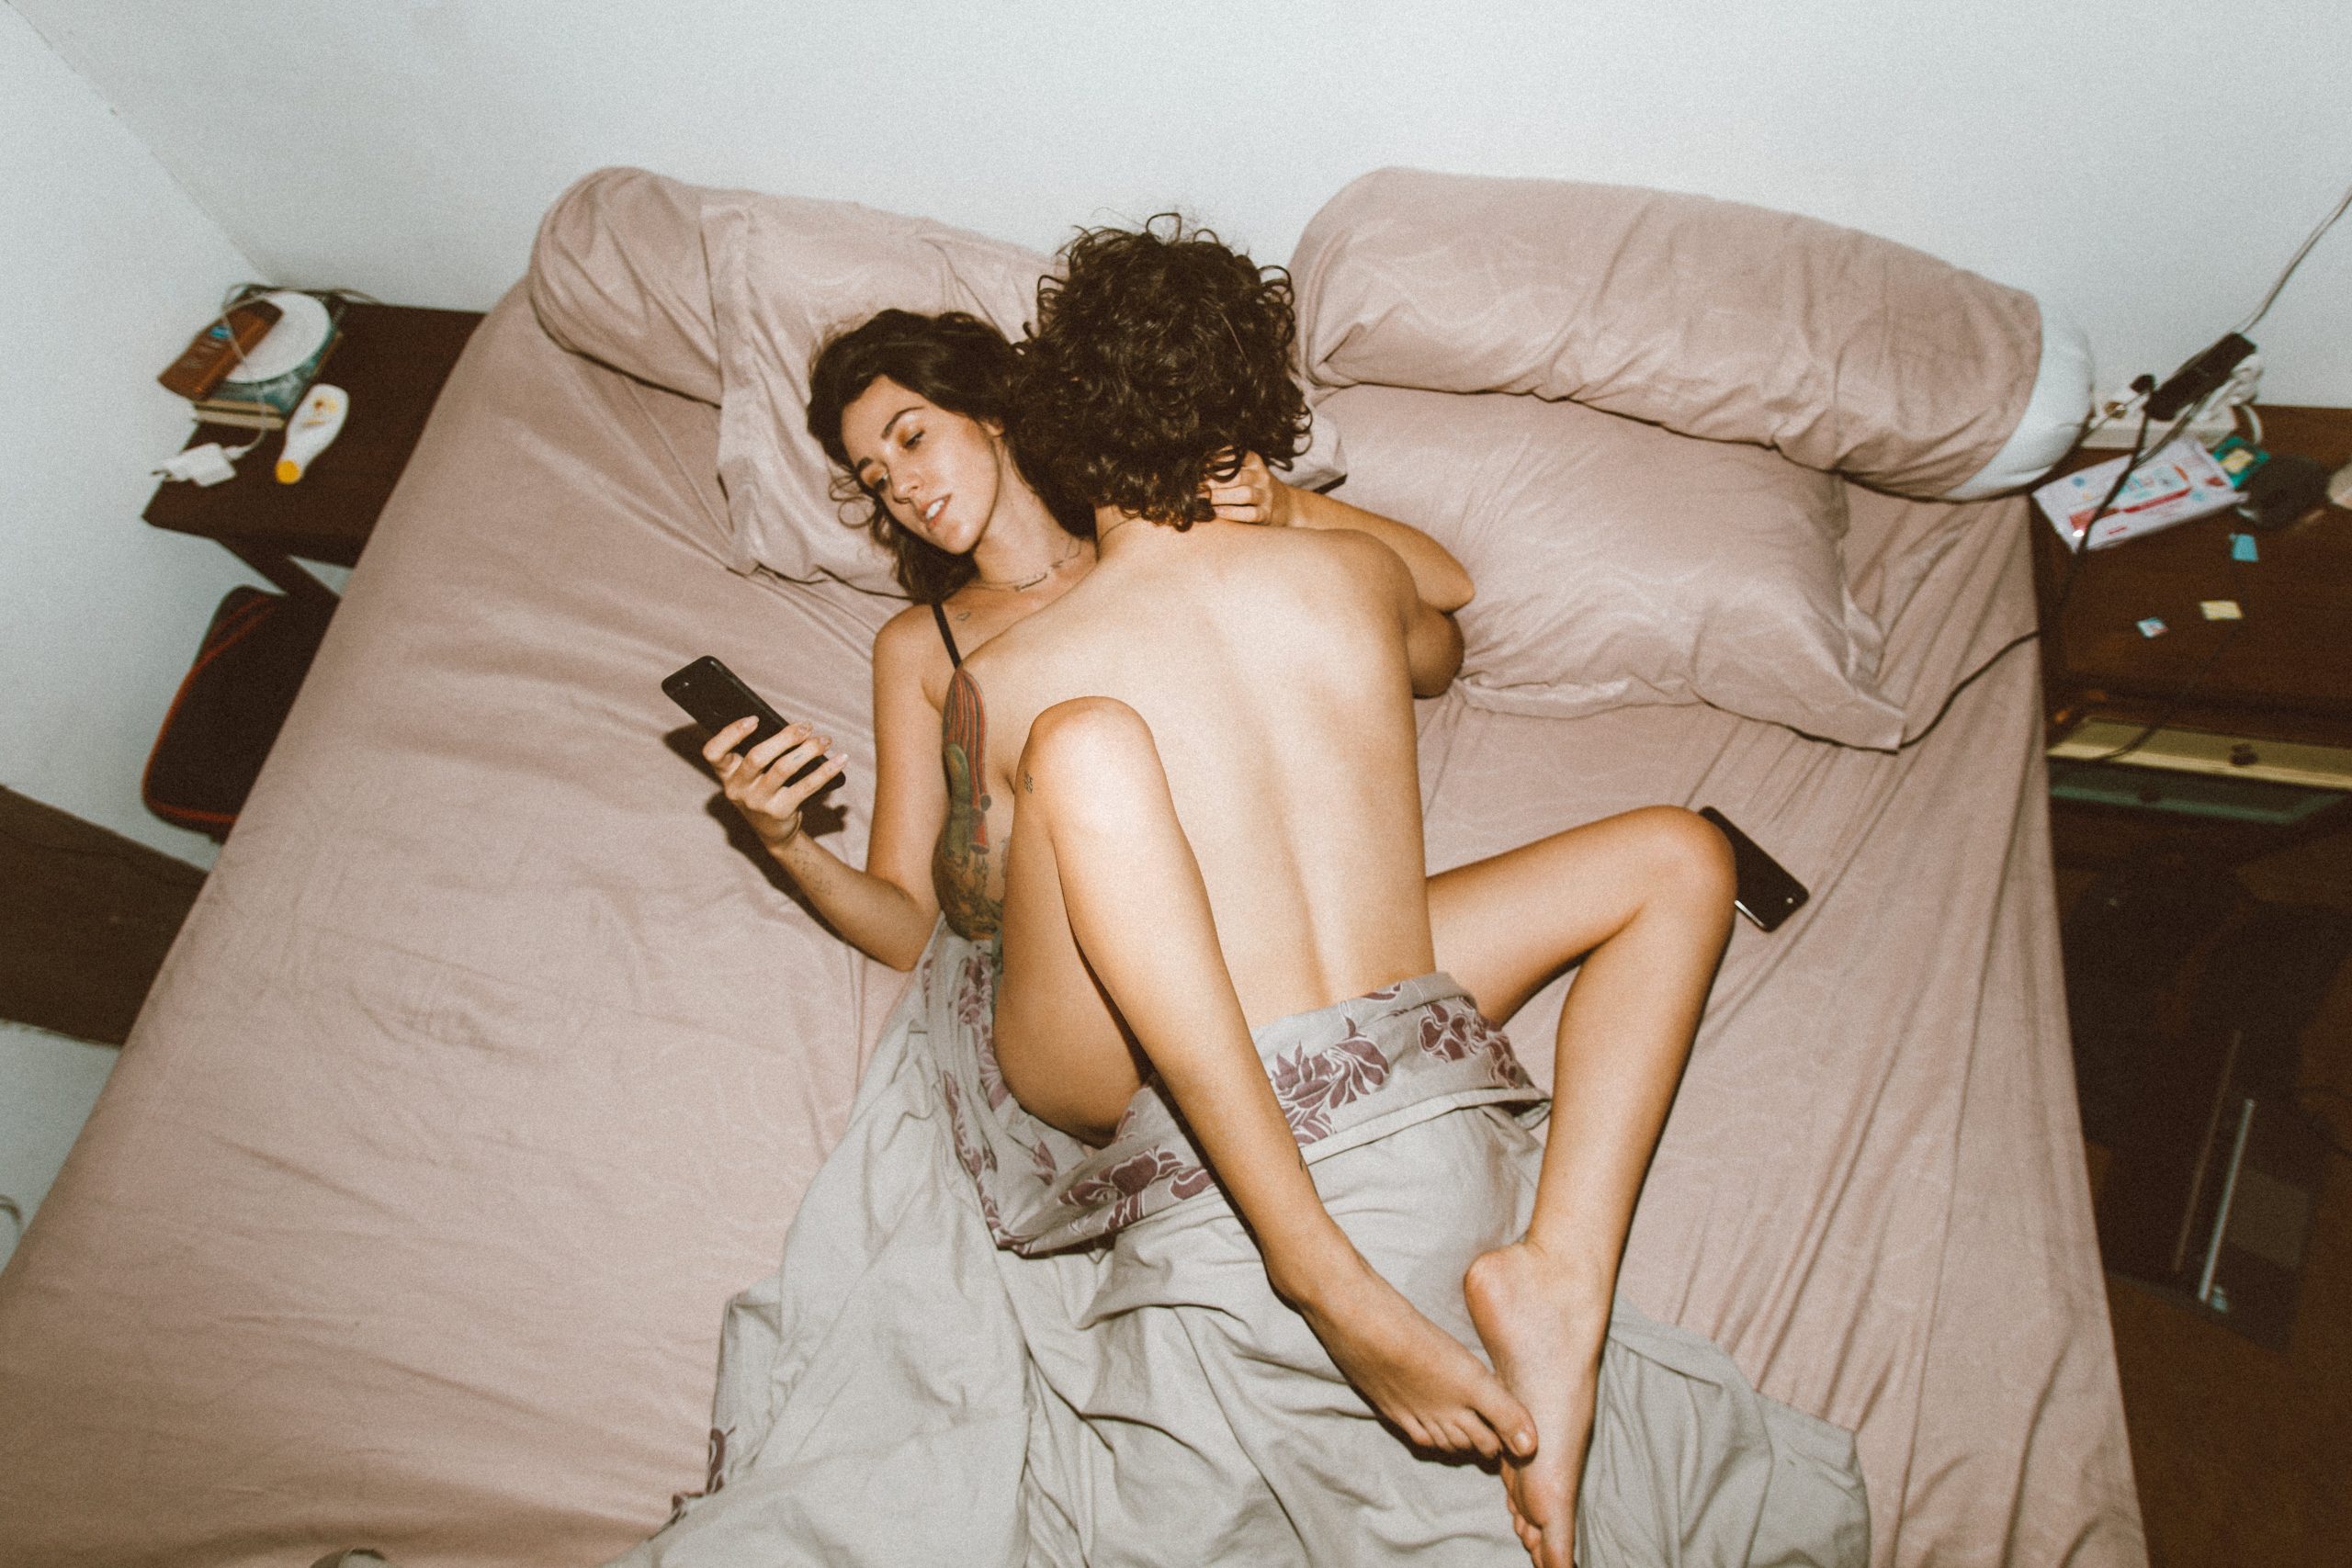 A woman and a man are making love in bed, but the woman is playing with her phone.